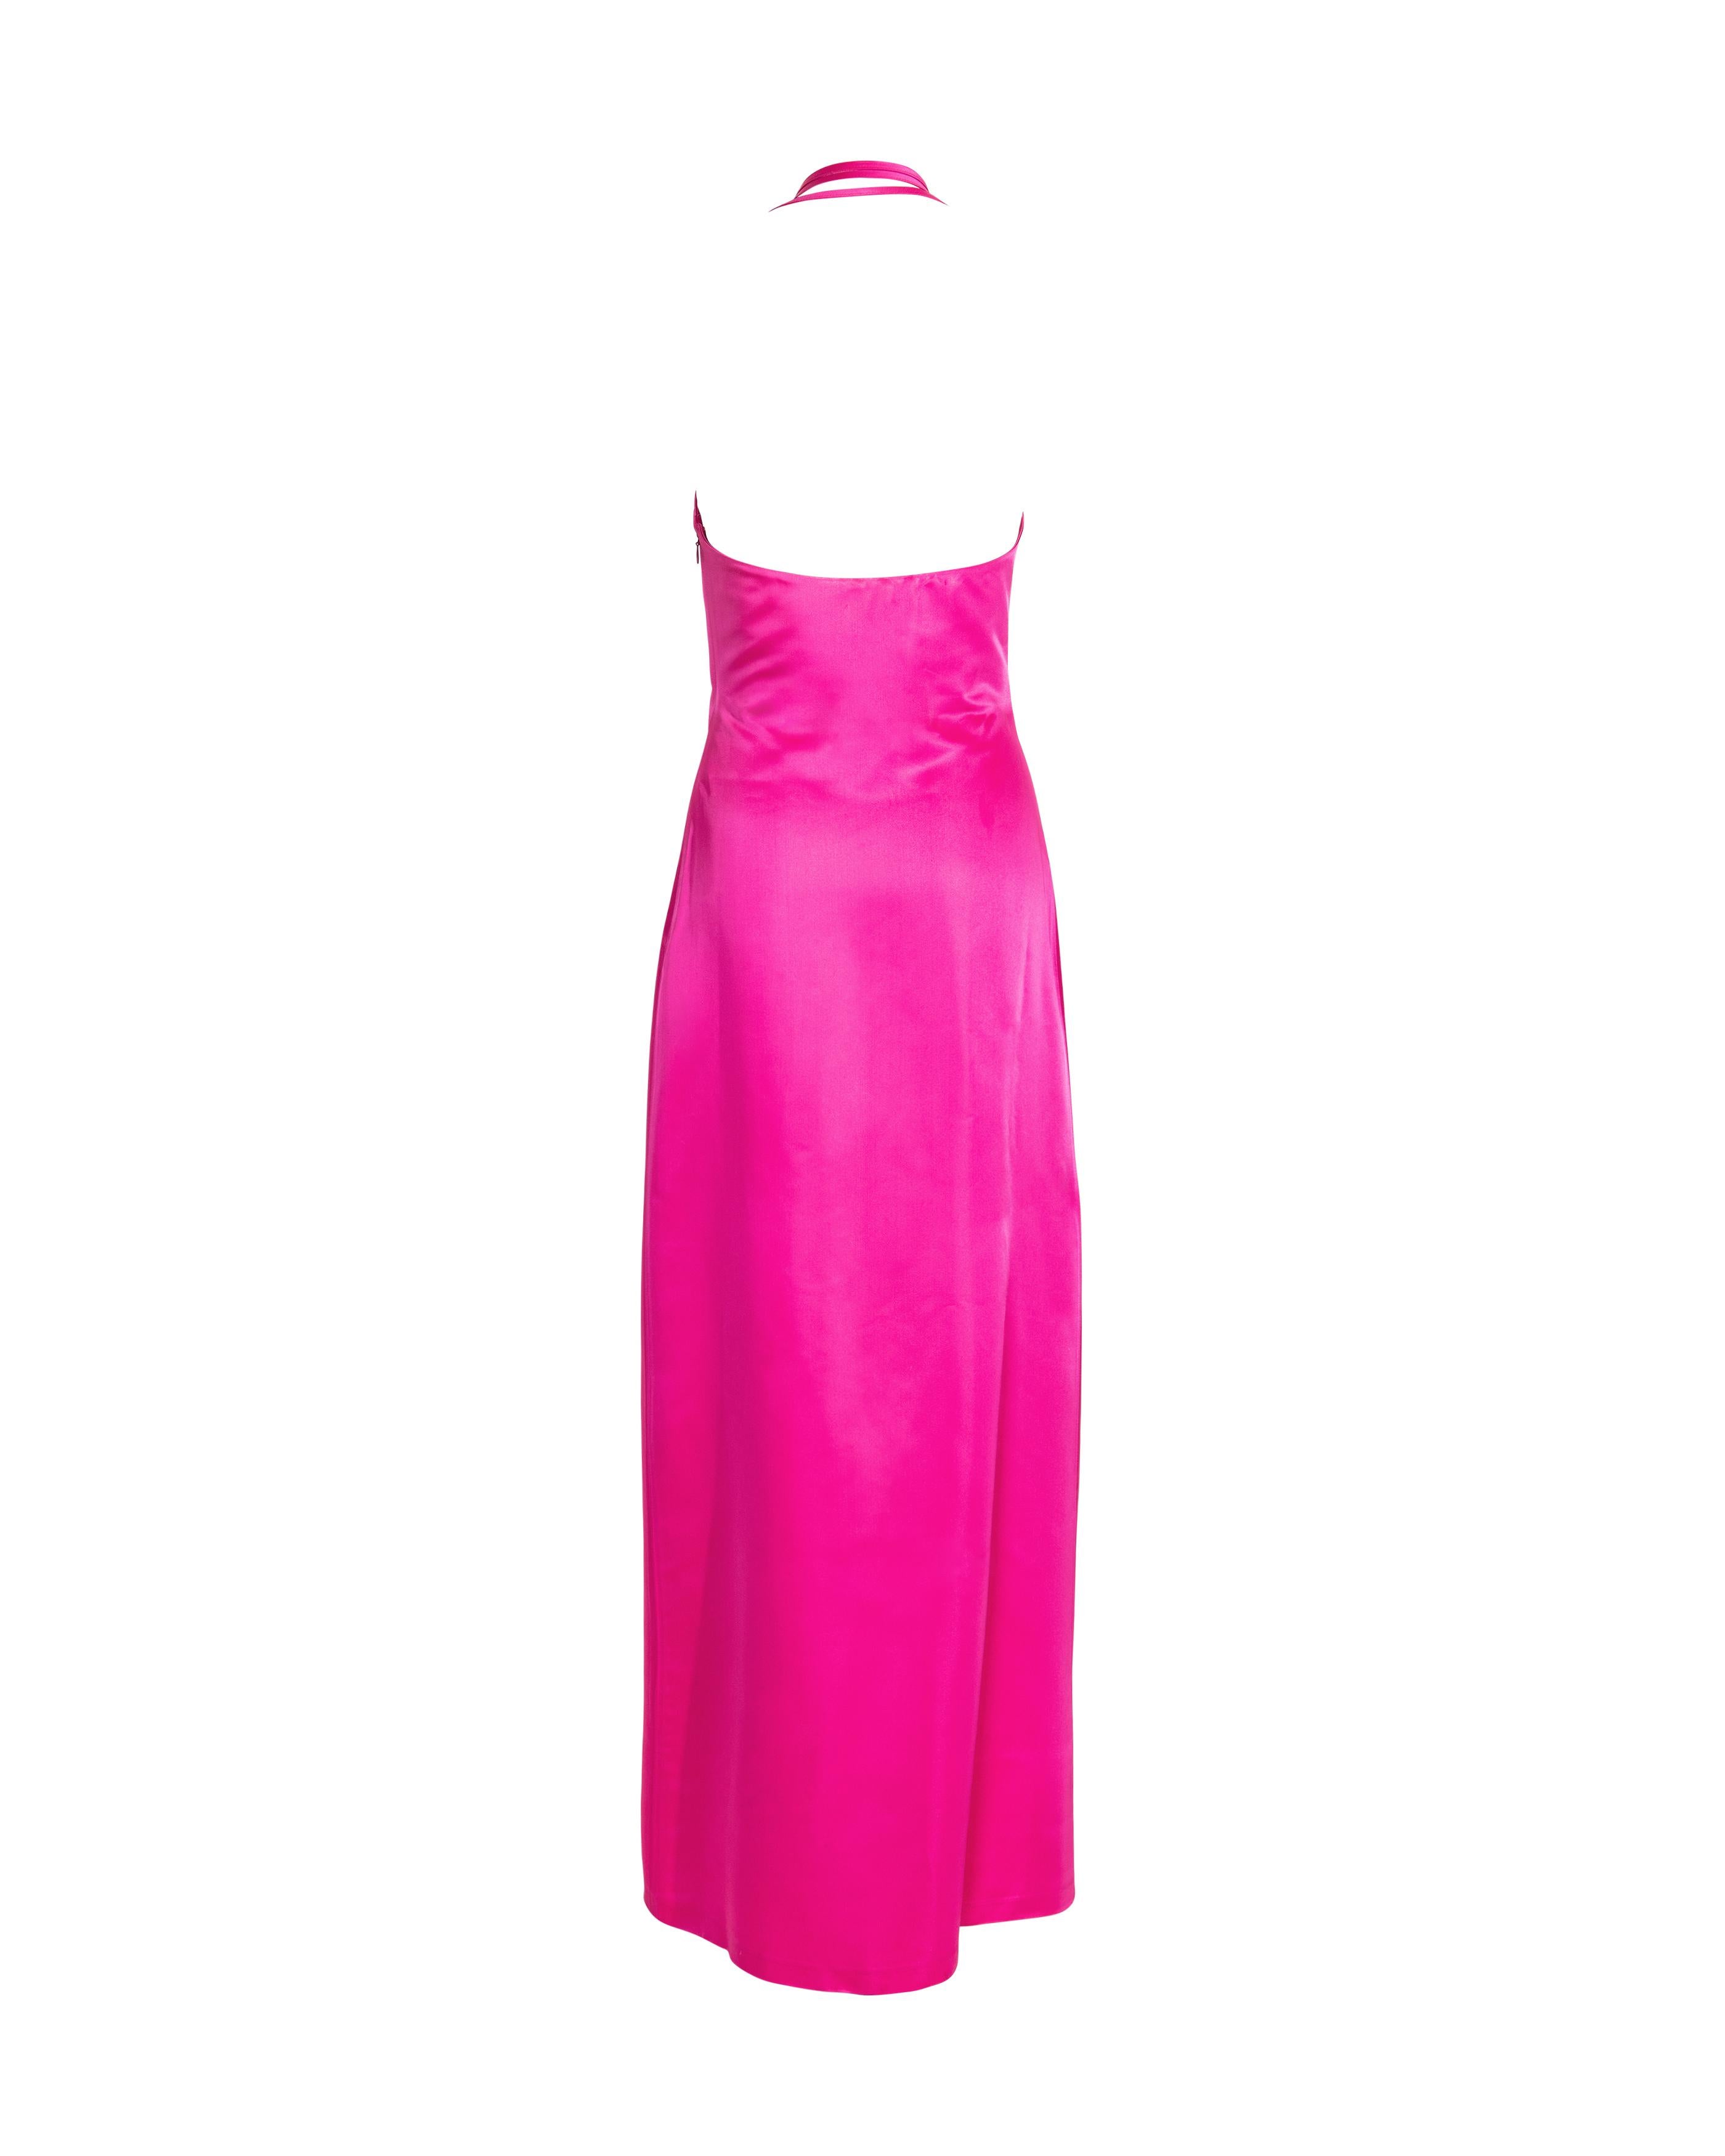 S/S 1999 Vivienne Westwood Red Label Hot Pink Silk Gown with Front Ties In Good Condition For Sale In North Hollywood, CA